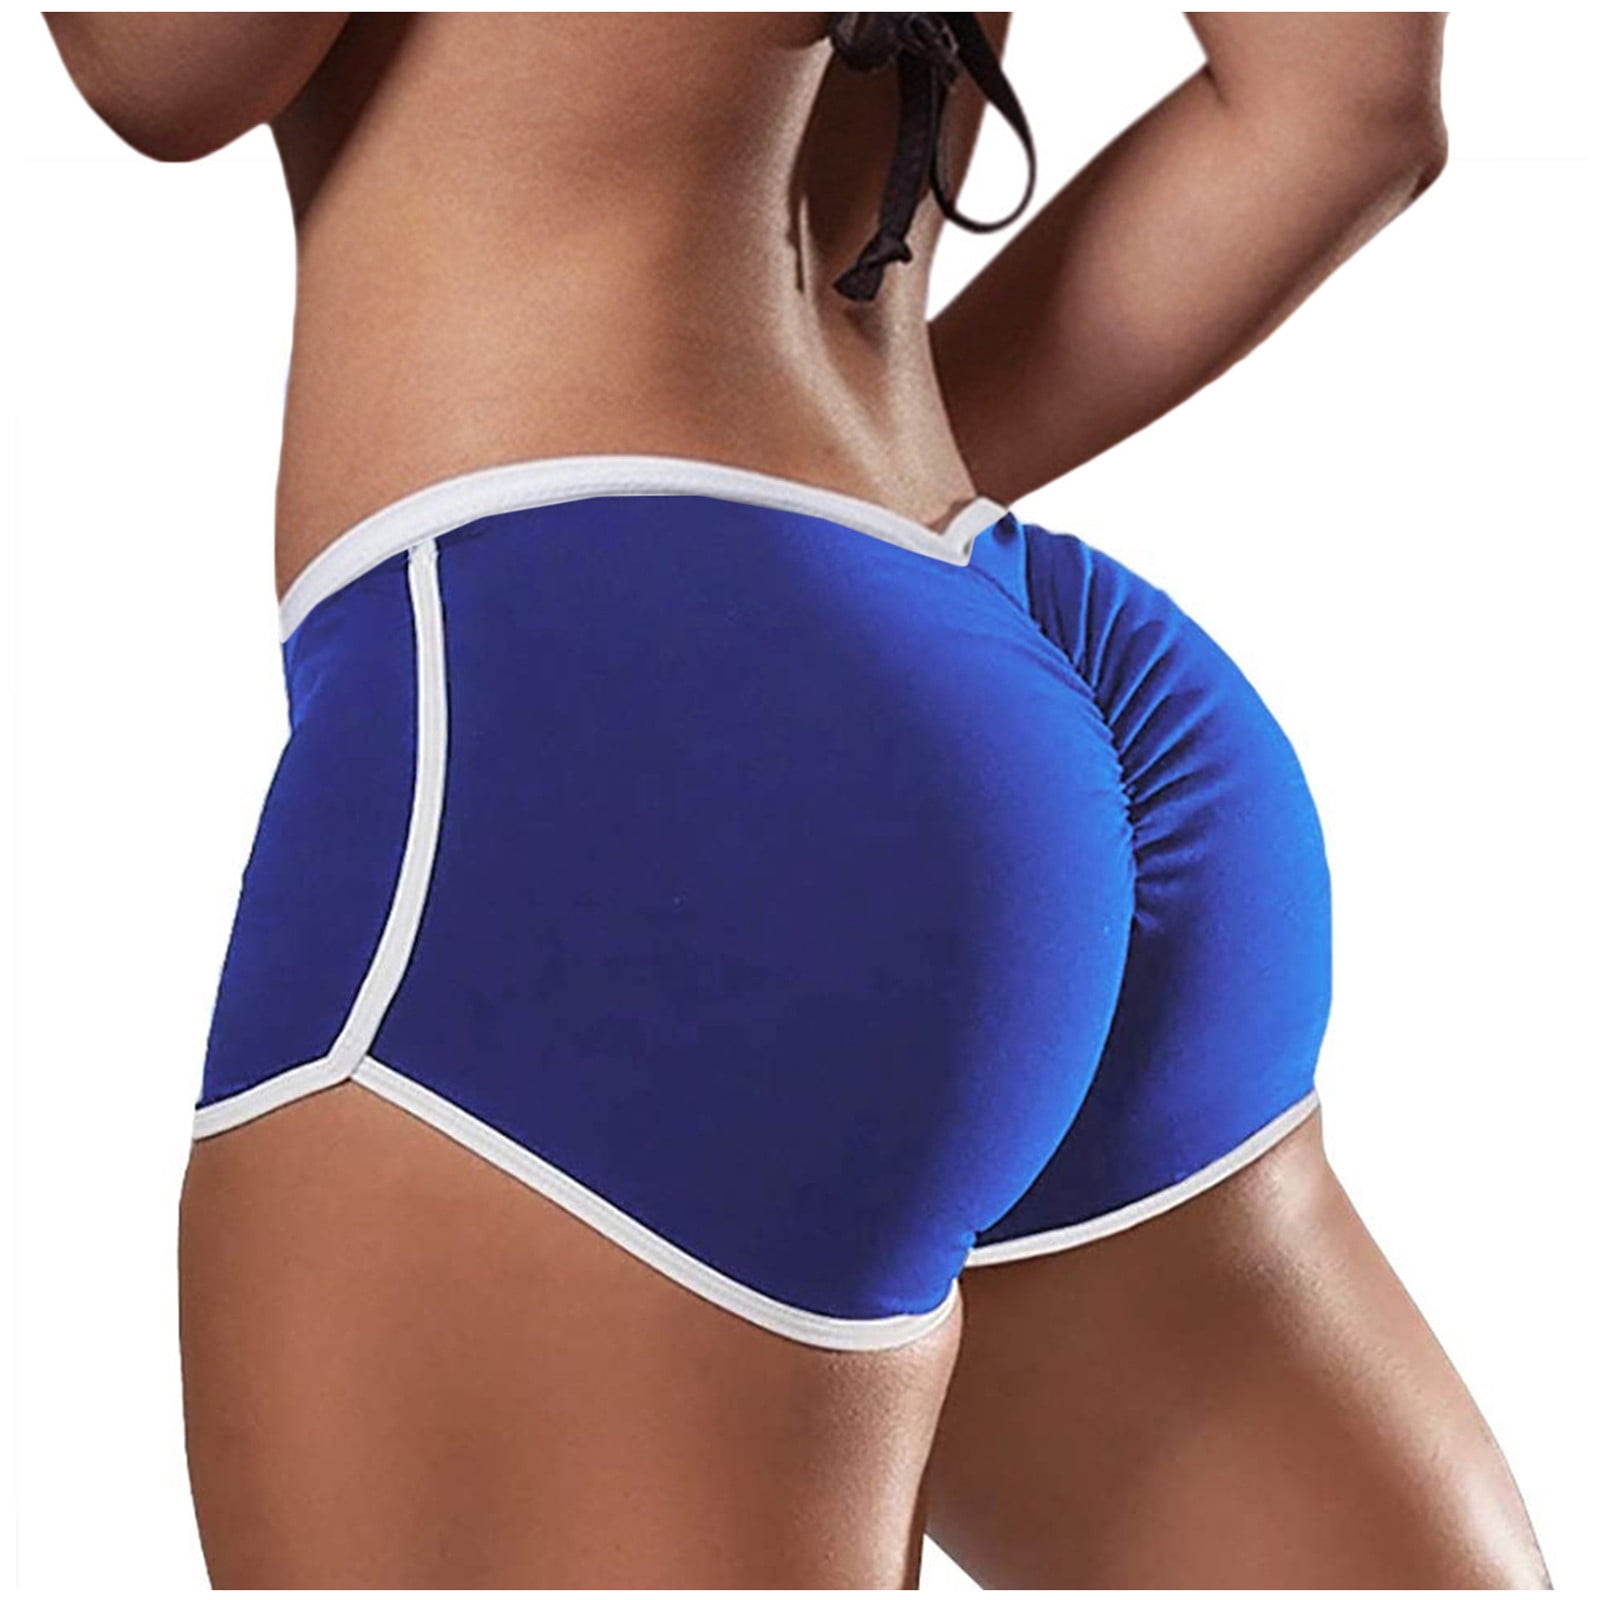 XMMSWDLA Soft Comfy Booty Shorts for Women Cotton Yoga Sports Workout Short  Athletic Cycling Hiking Sports Shorts Blue M Ladies Underwear